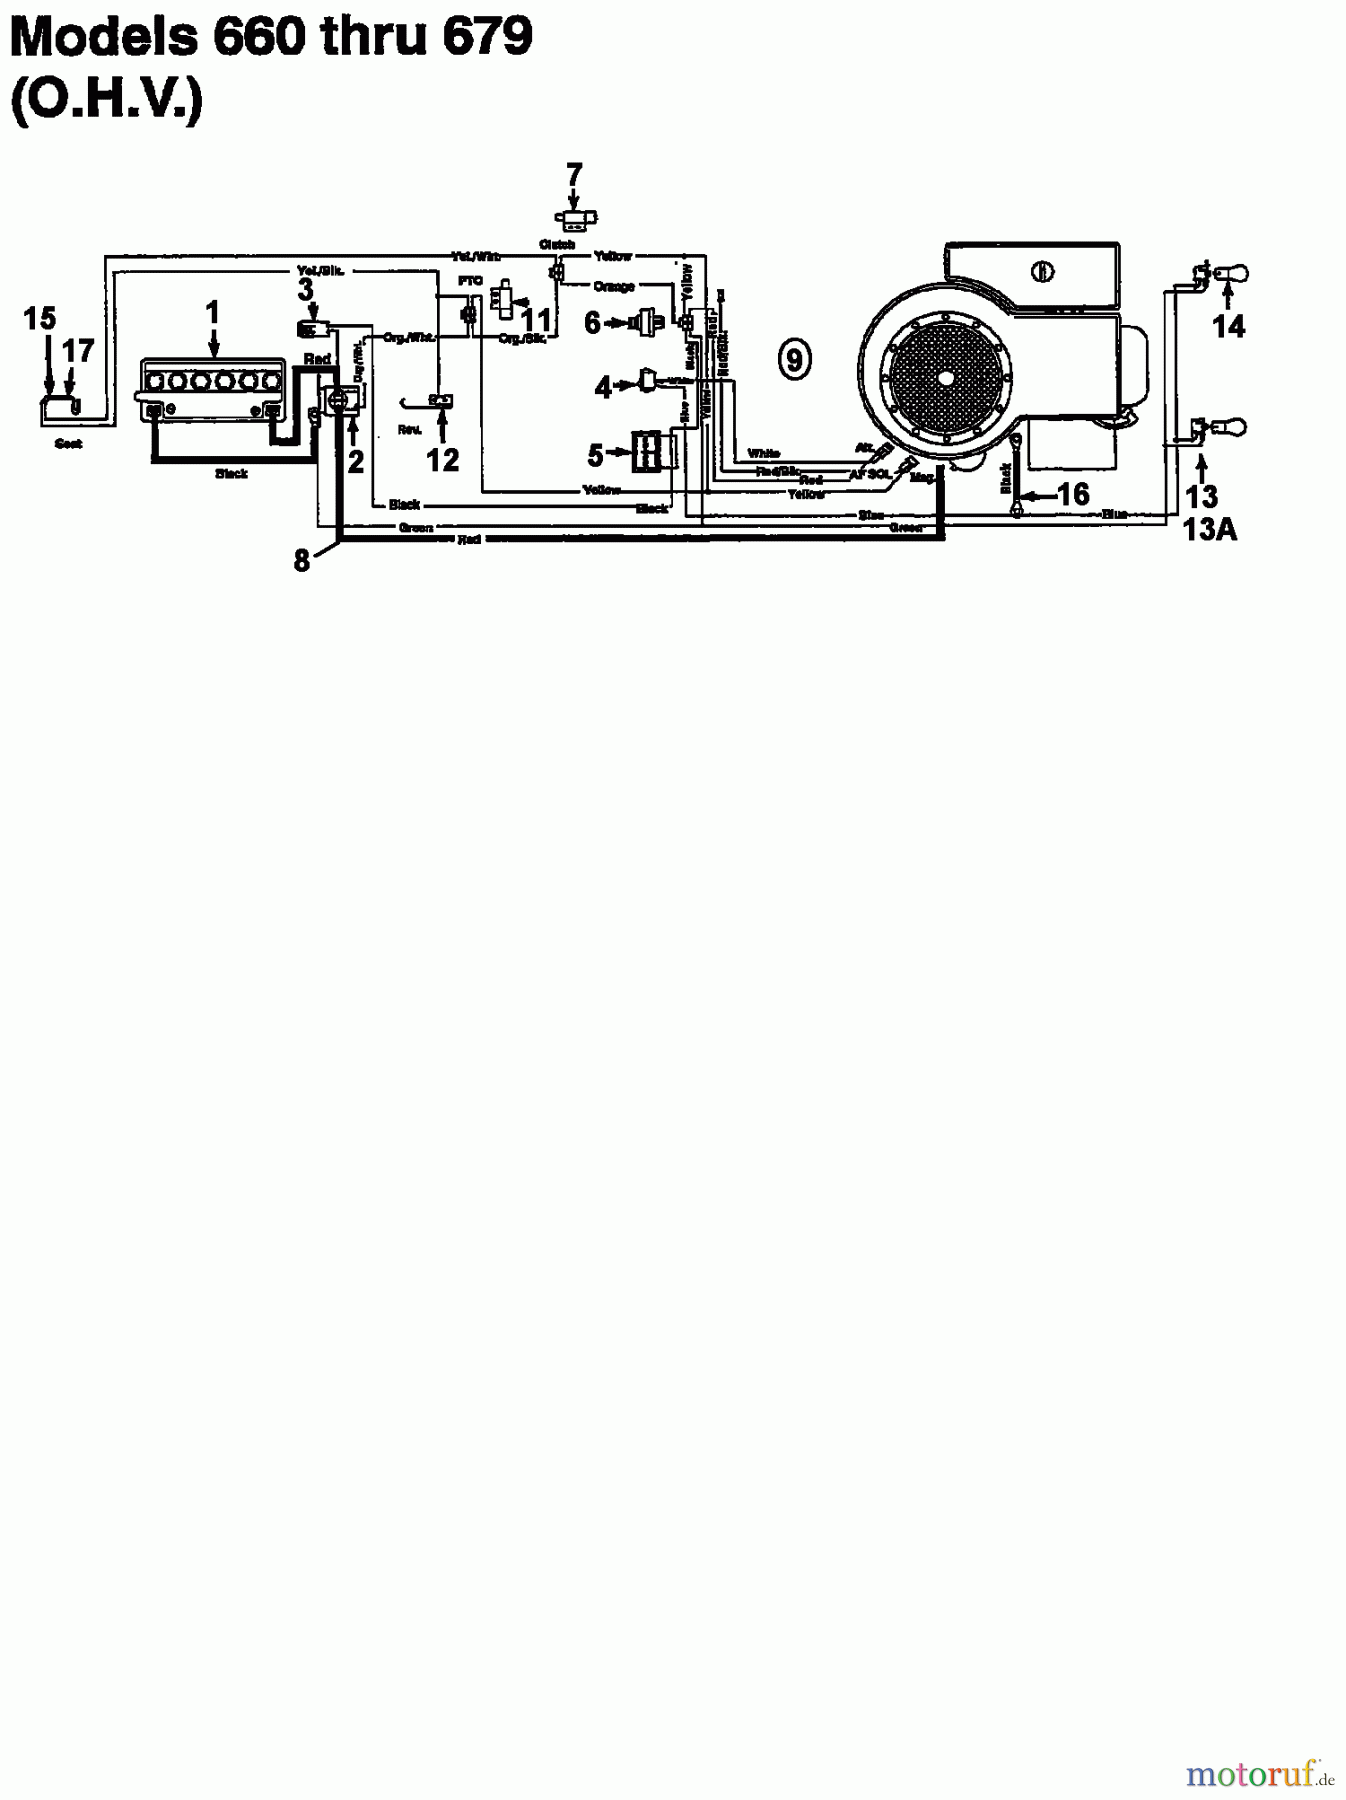  Columbia Lawn tractors 112/960 N 133K670F626  (1993) Wiring diagram for O.H.V.